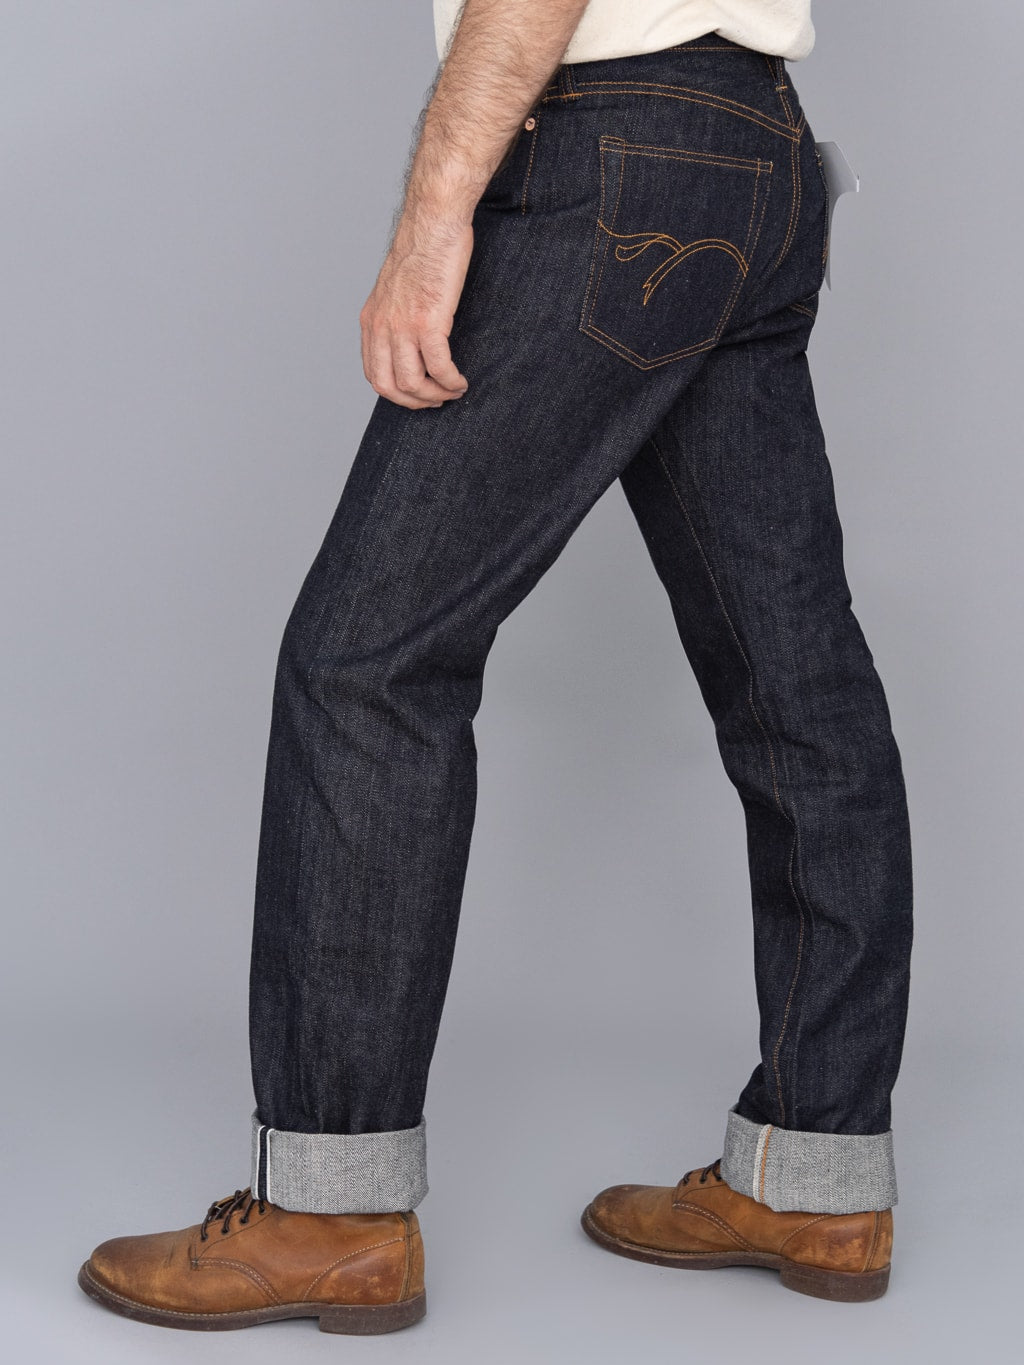 The Flat Head 3009 14.5oz straight tapered Jeans mid rise